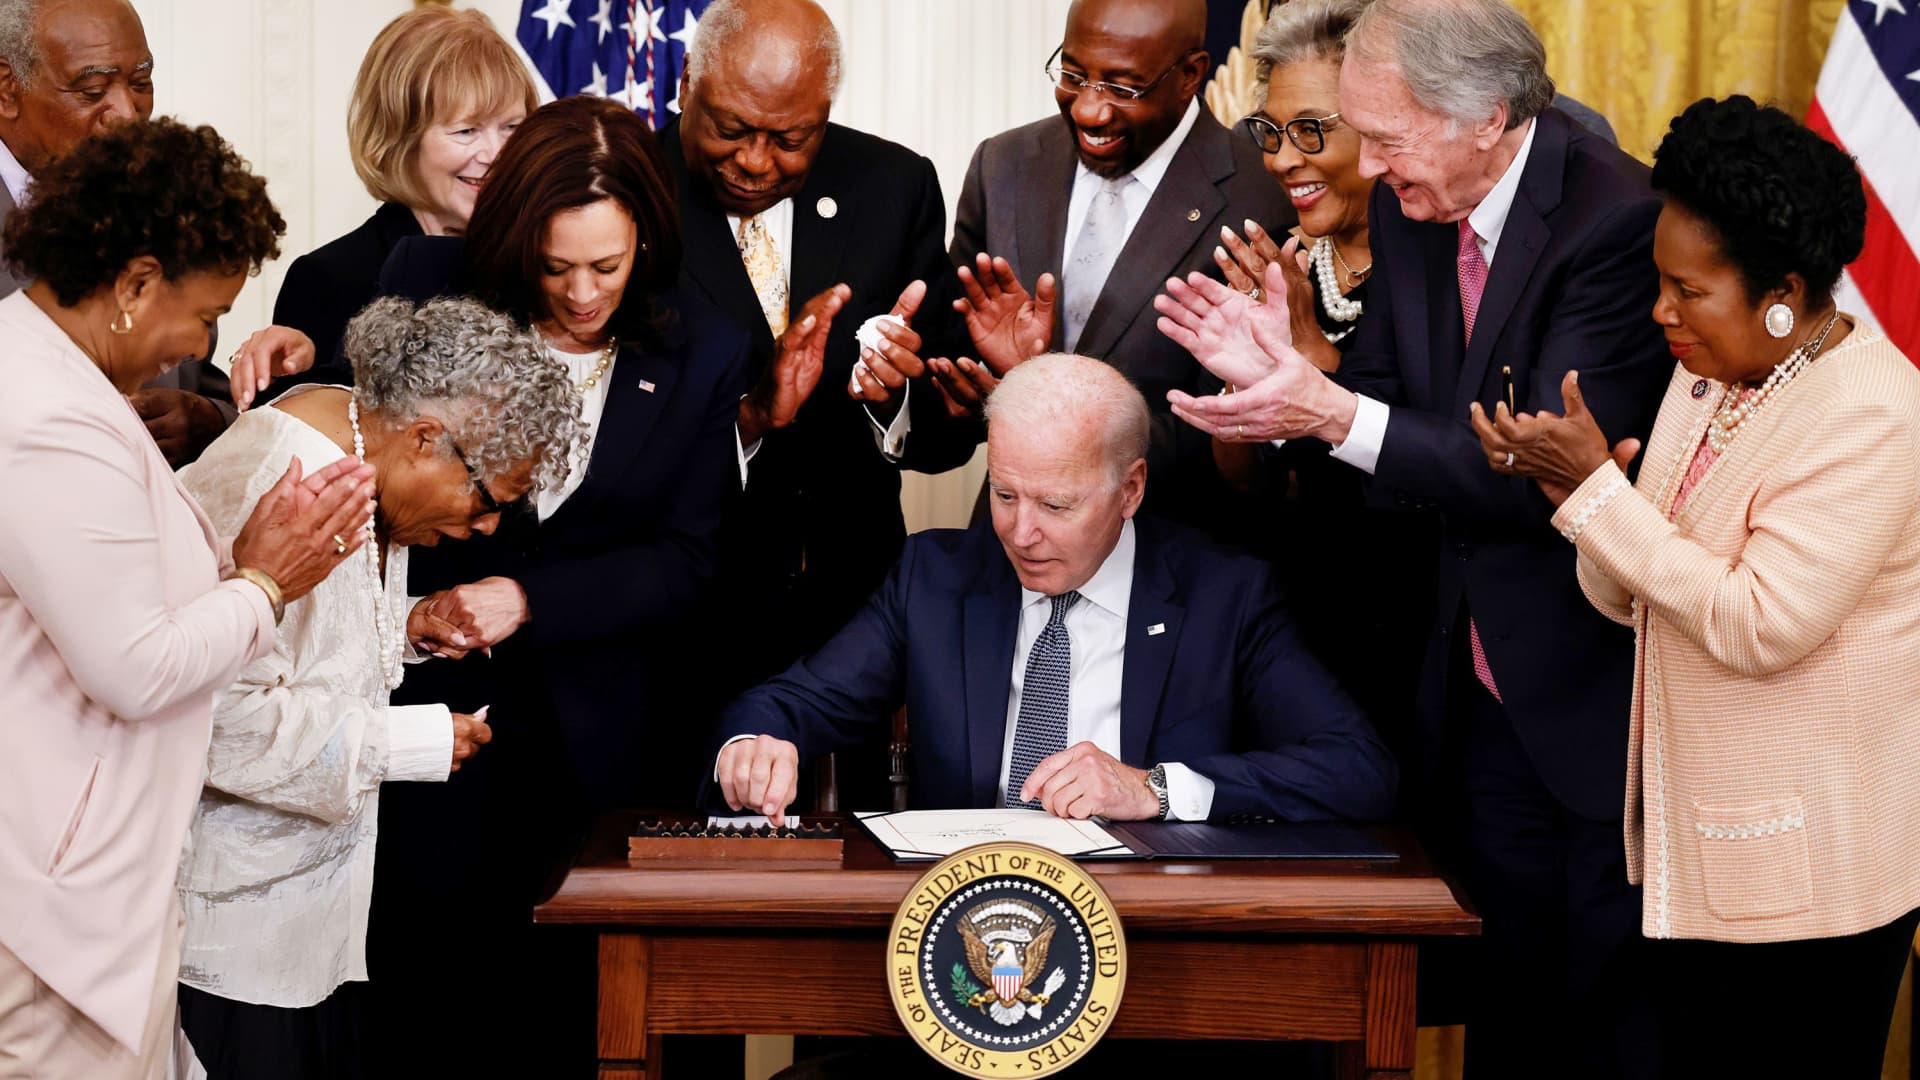 U.S. President Joe Biden is applauded as he reaches for a pen to sign the Juneteenth National Independence Day Act into law as Vice President Kamala Harris stands by in the East Room of the White House in Washington, June 17, 2021.